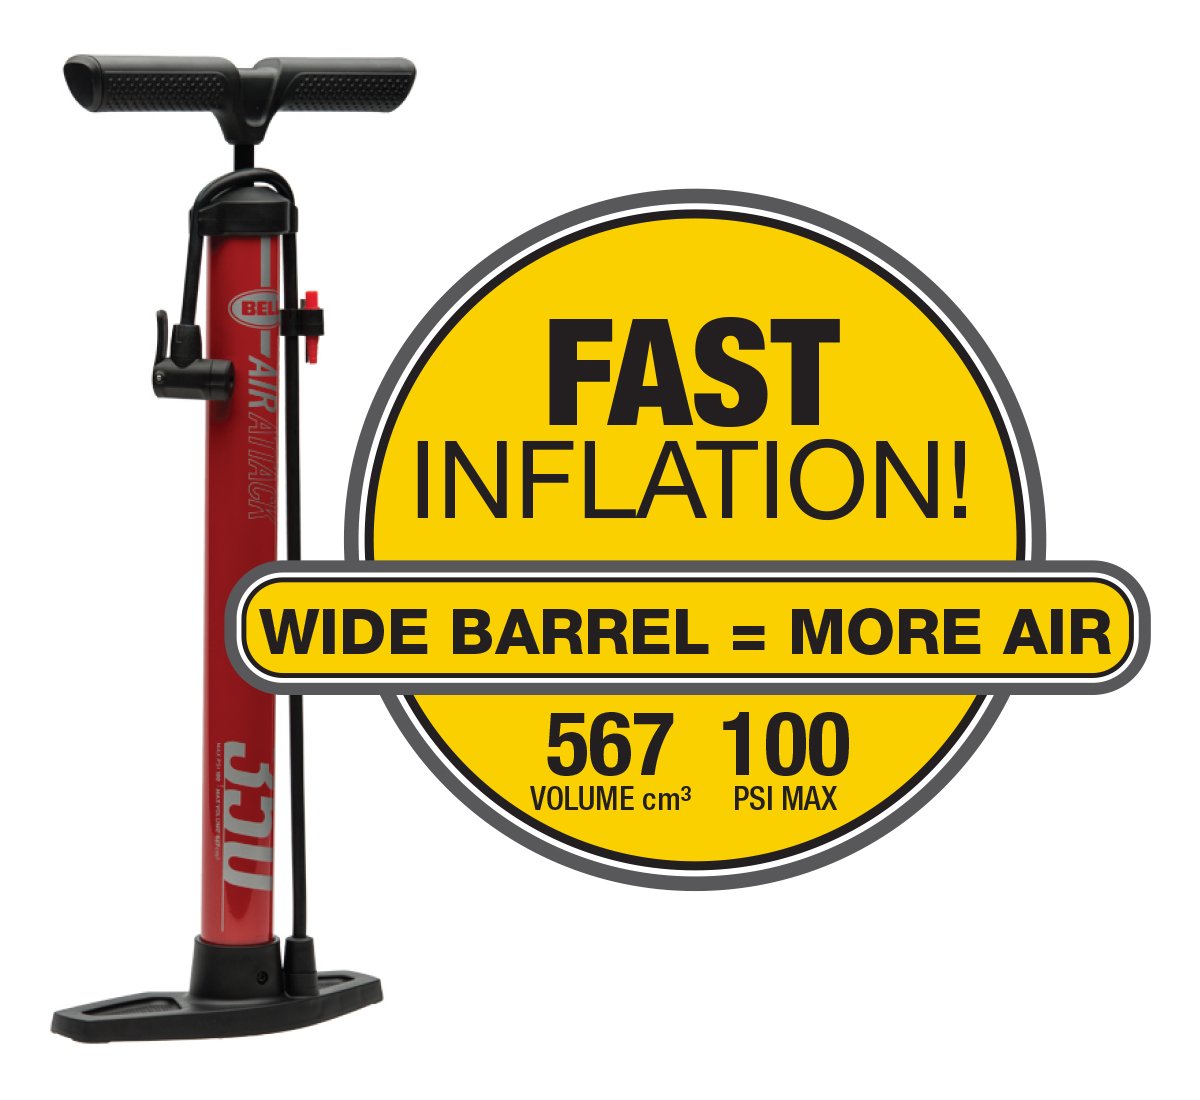 Bell Air Attack 350 High Volume Bicycle Pump Red Stripe, Air Attack 350:  Buy Online at Best Price in UAE - Amazon.ae